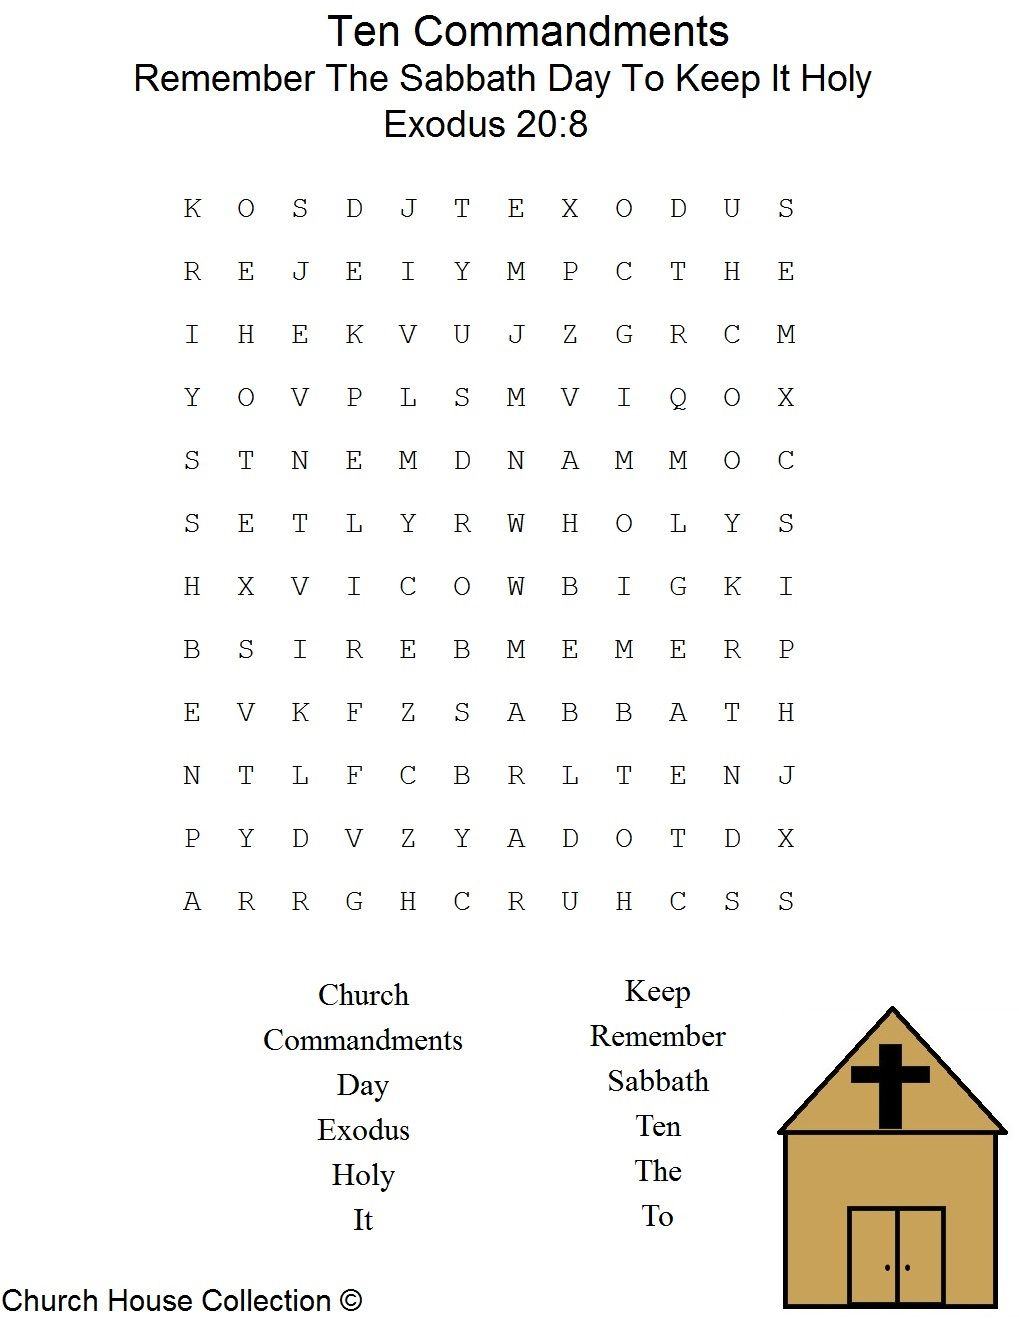 This Is A Free Printable Ten Commandments Word Find Puzzle For The | 10 Commandments Printable Worksheets